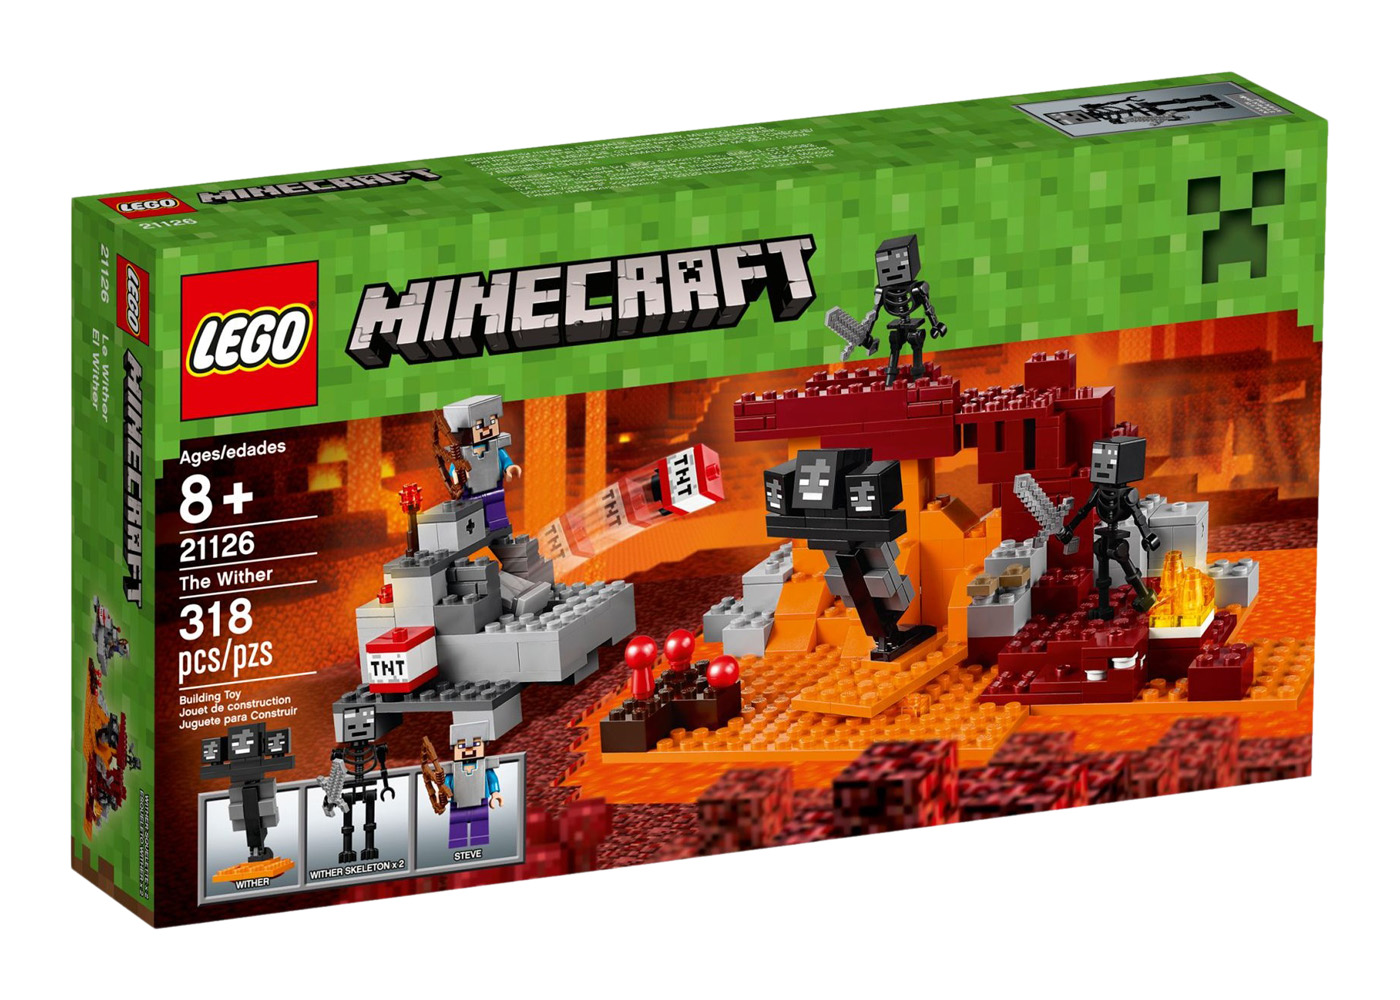 LEGO Minecraft The Wither Set 21126